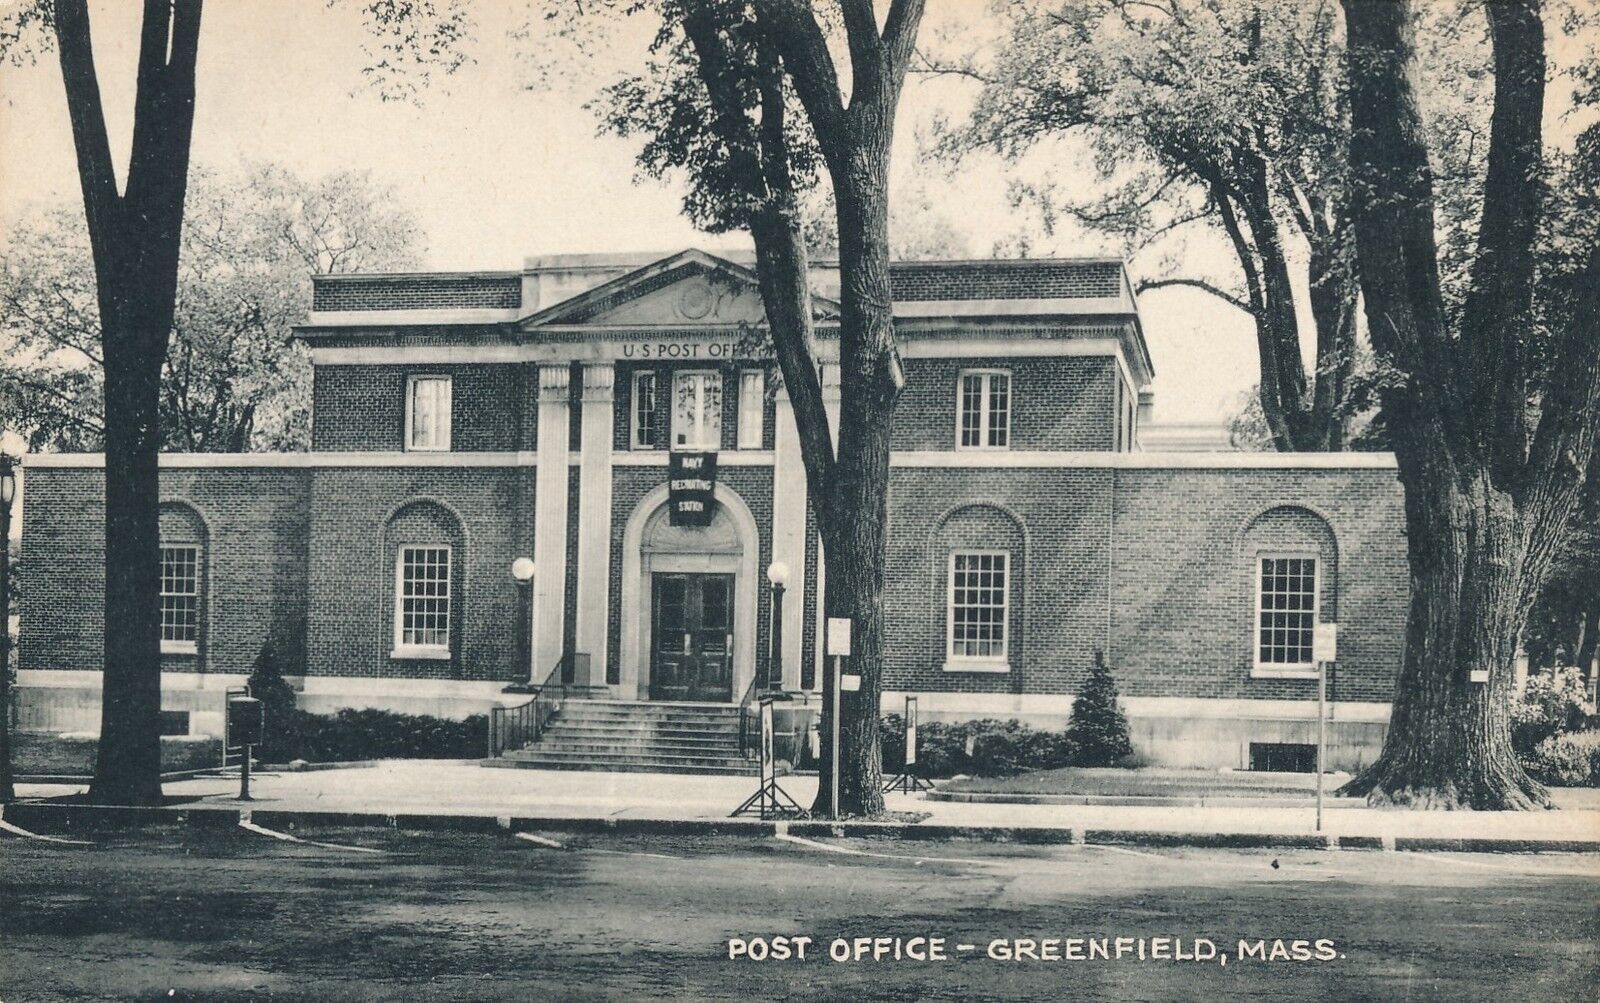 GREENFIELD MA – Post Office